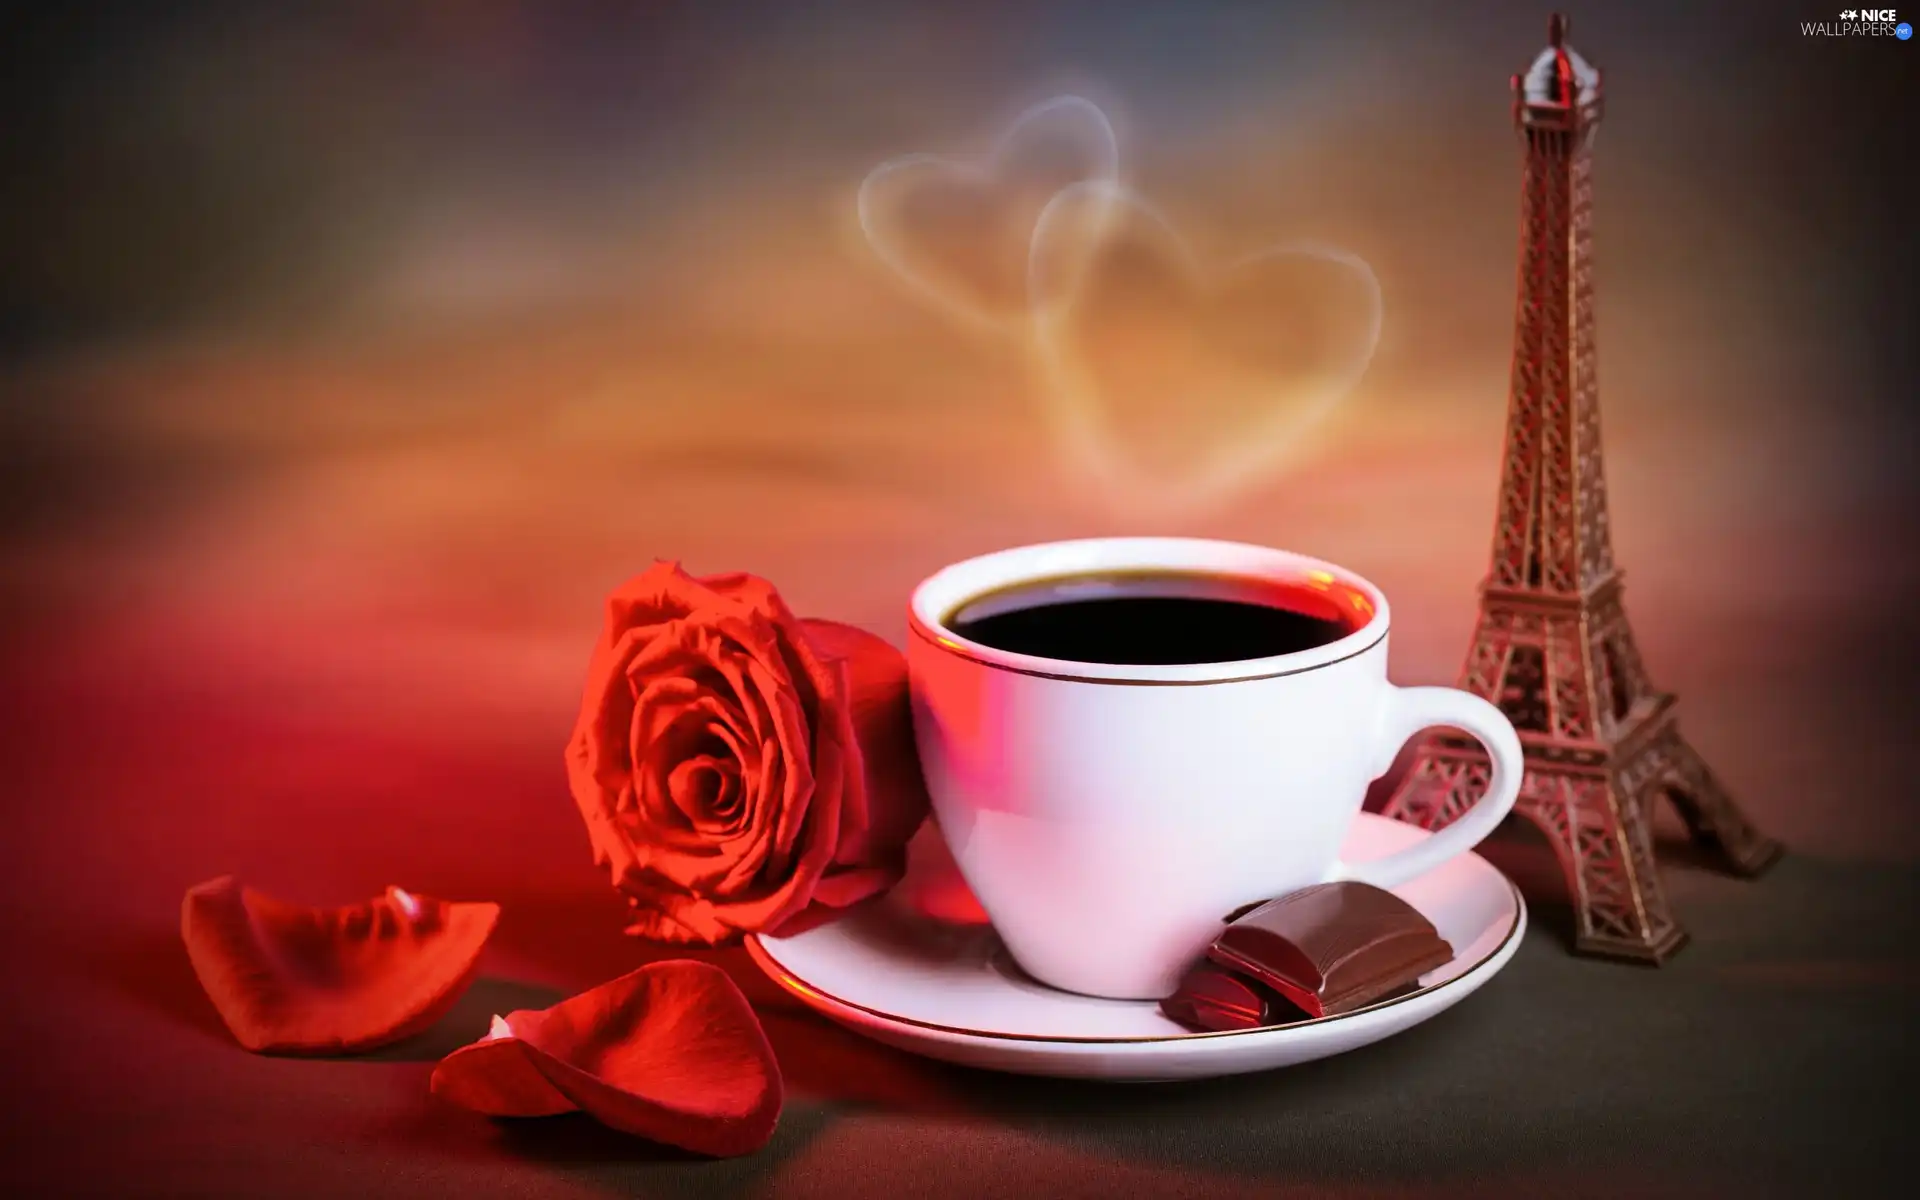 composition, tower, hearts, cup, Valentine